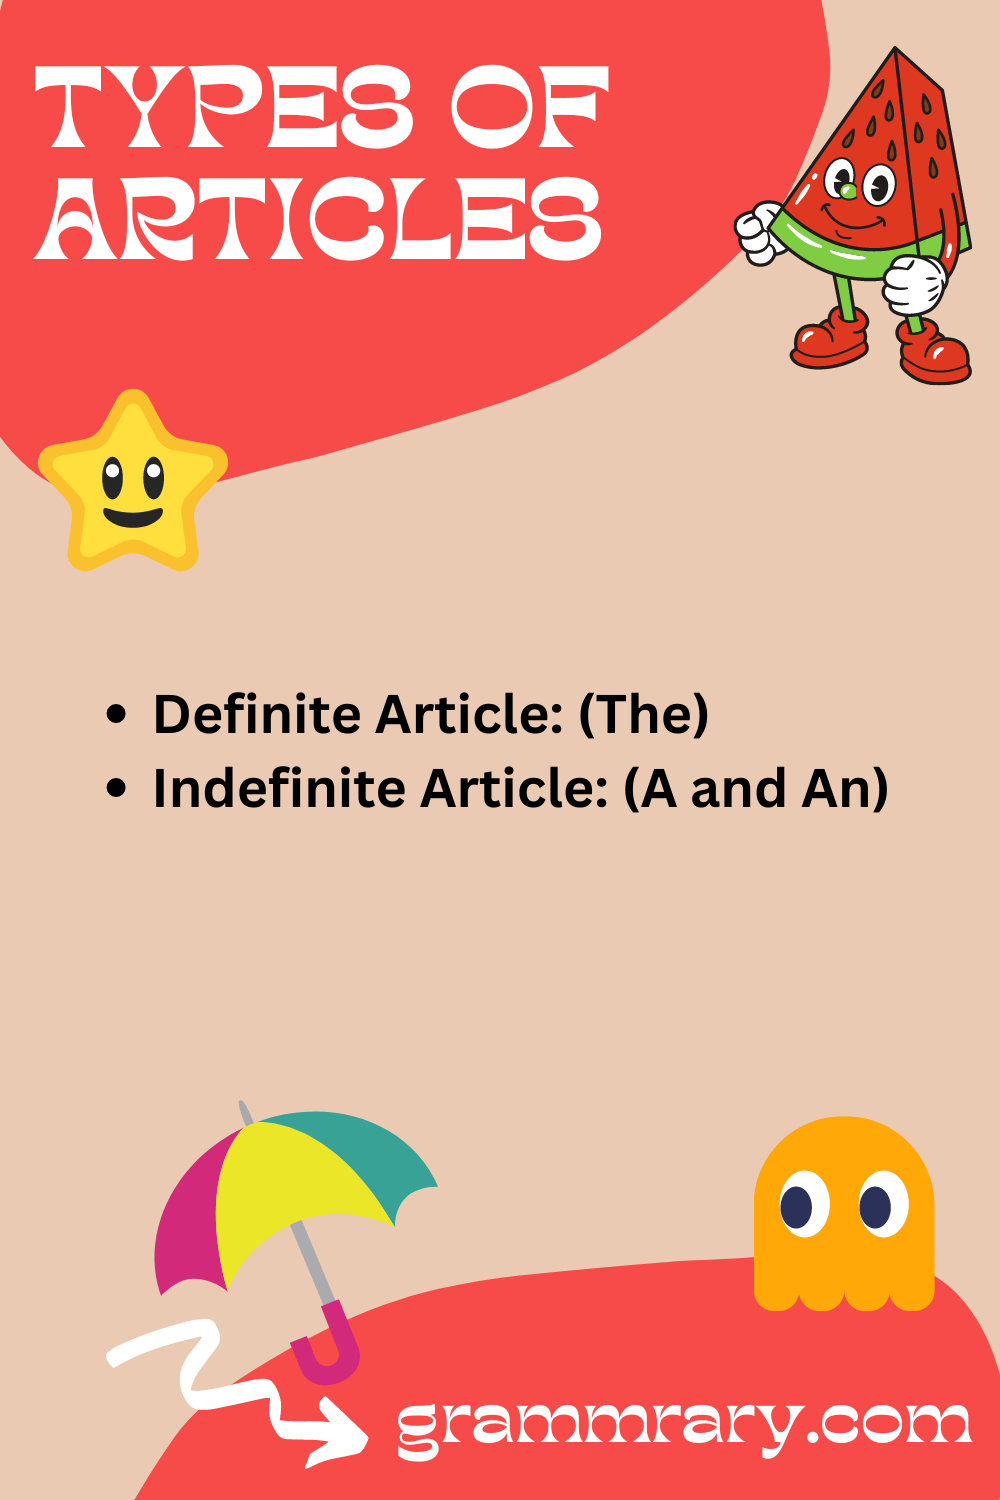 Types of articles